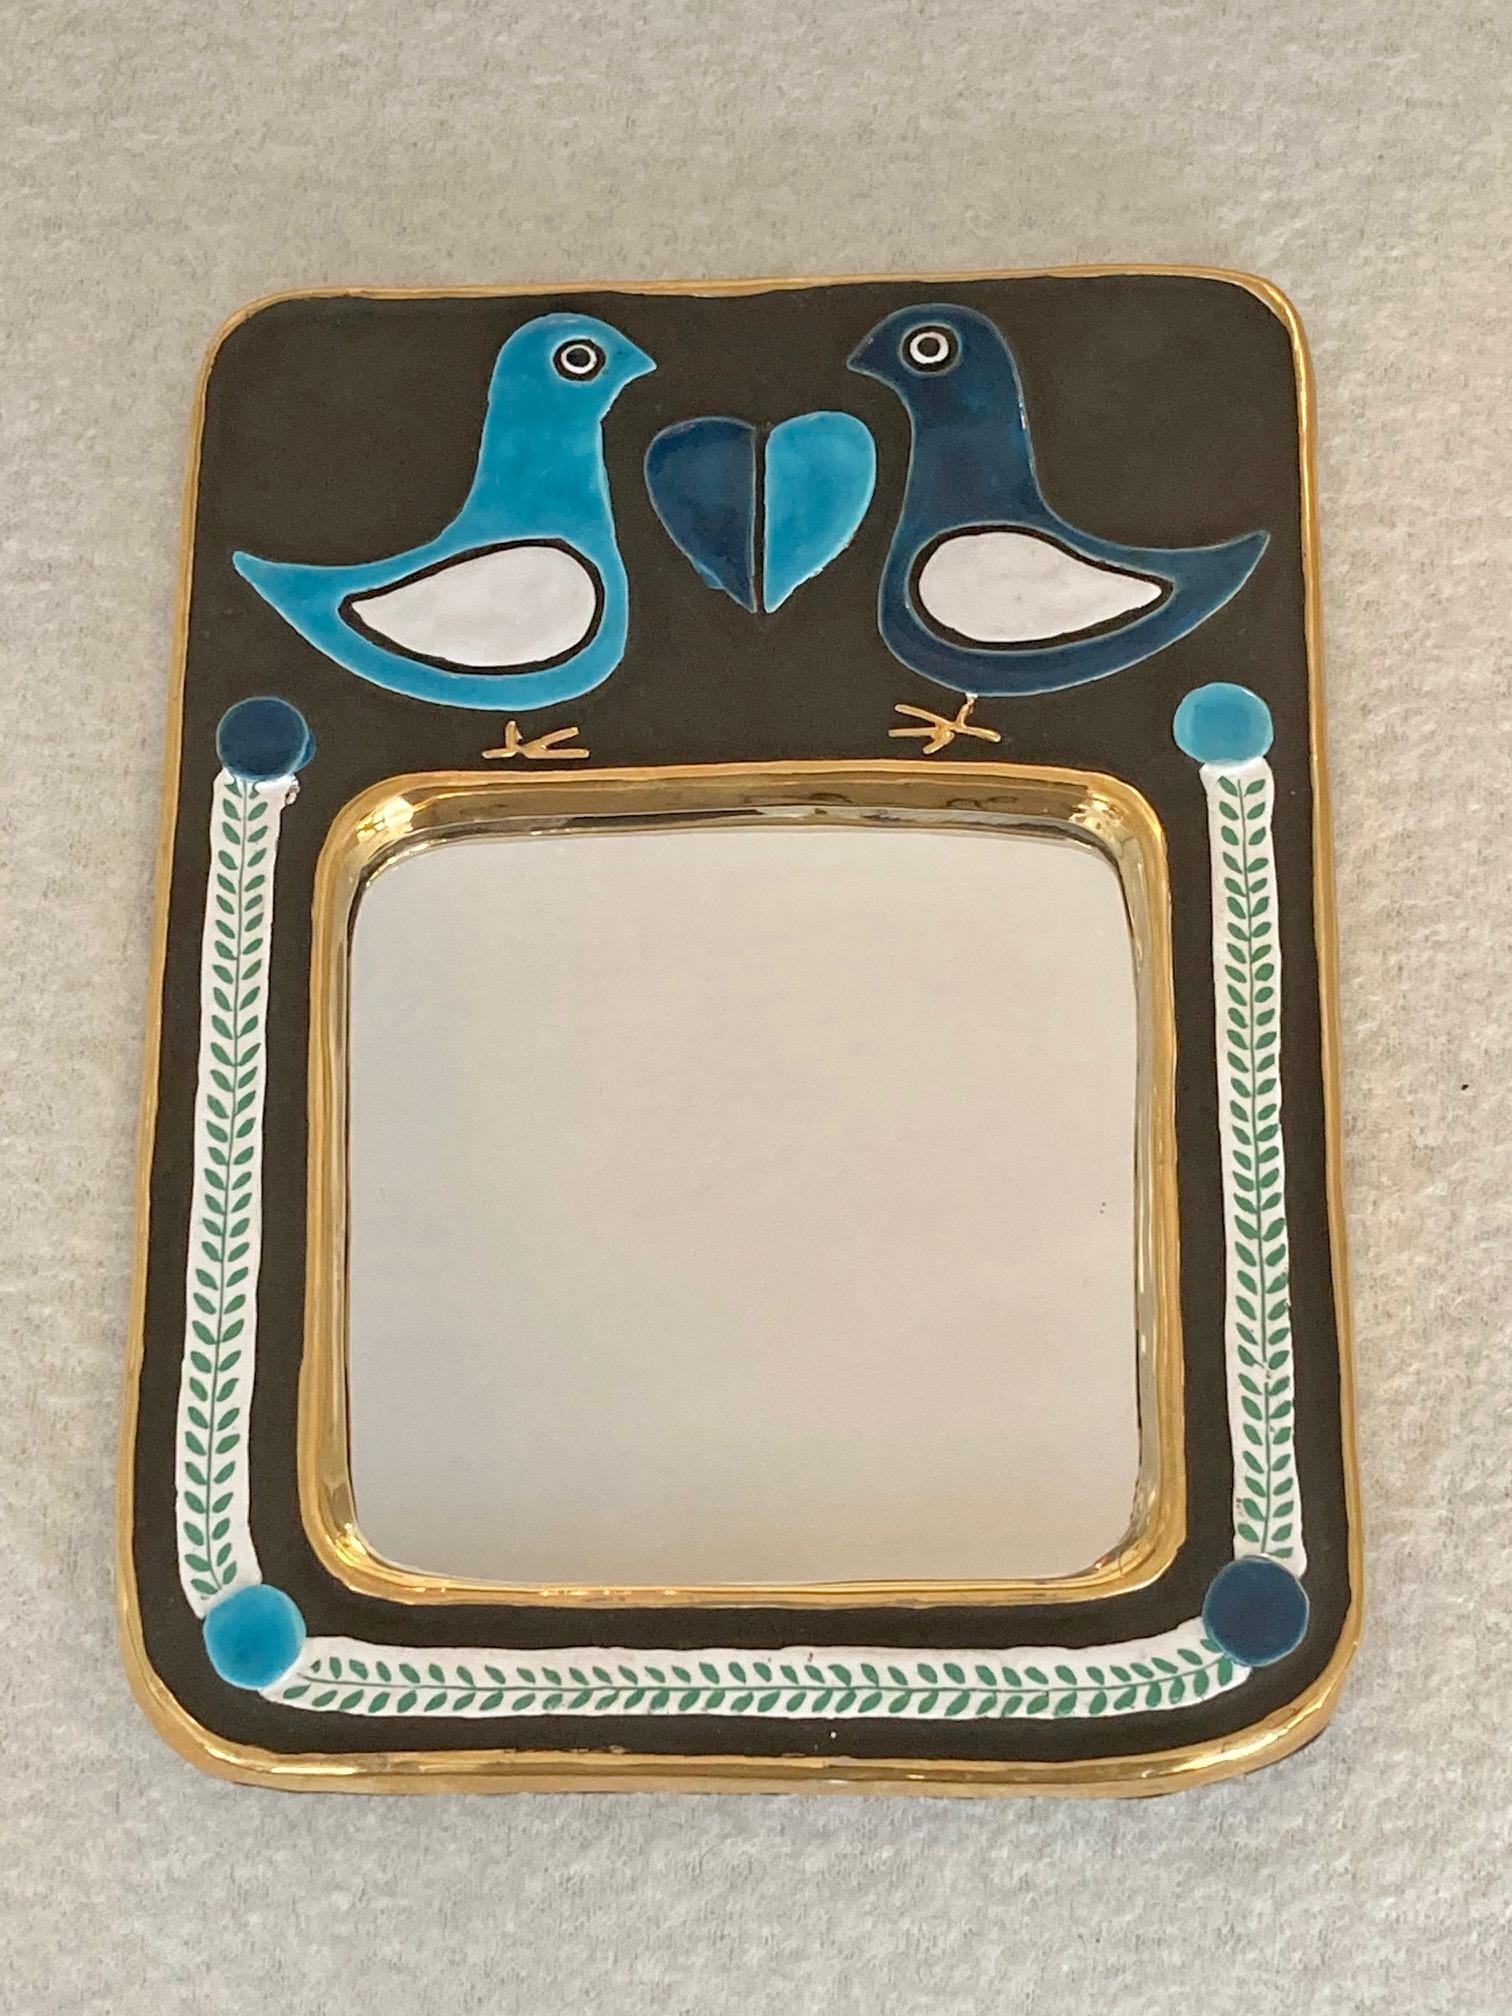 A ceramic wall mirror, 2 doves facing each other with a heart in the middle.
 Enameled in 2 shades of blue, white, black and gold.
Original green felt at the back, in very good condition.
Mithé Espelt (born 1923)
Lunel, south of France,
circa